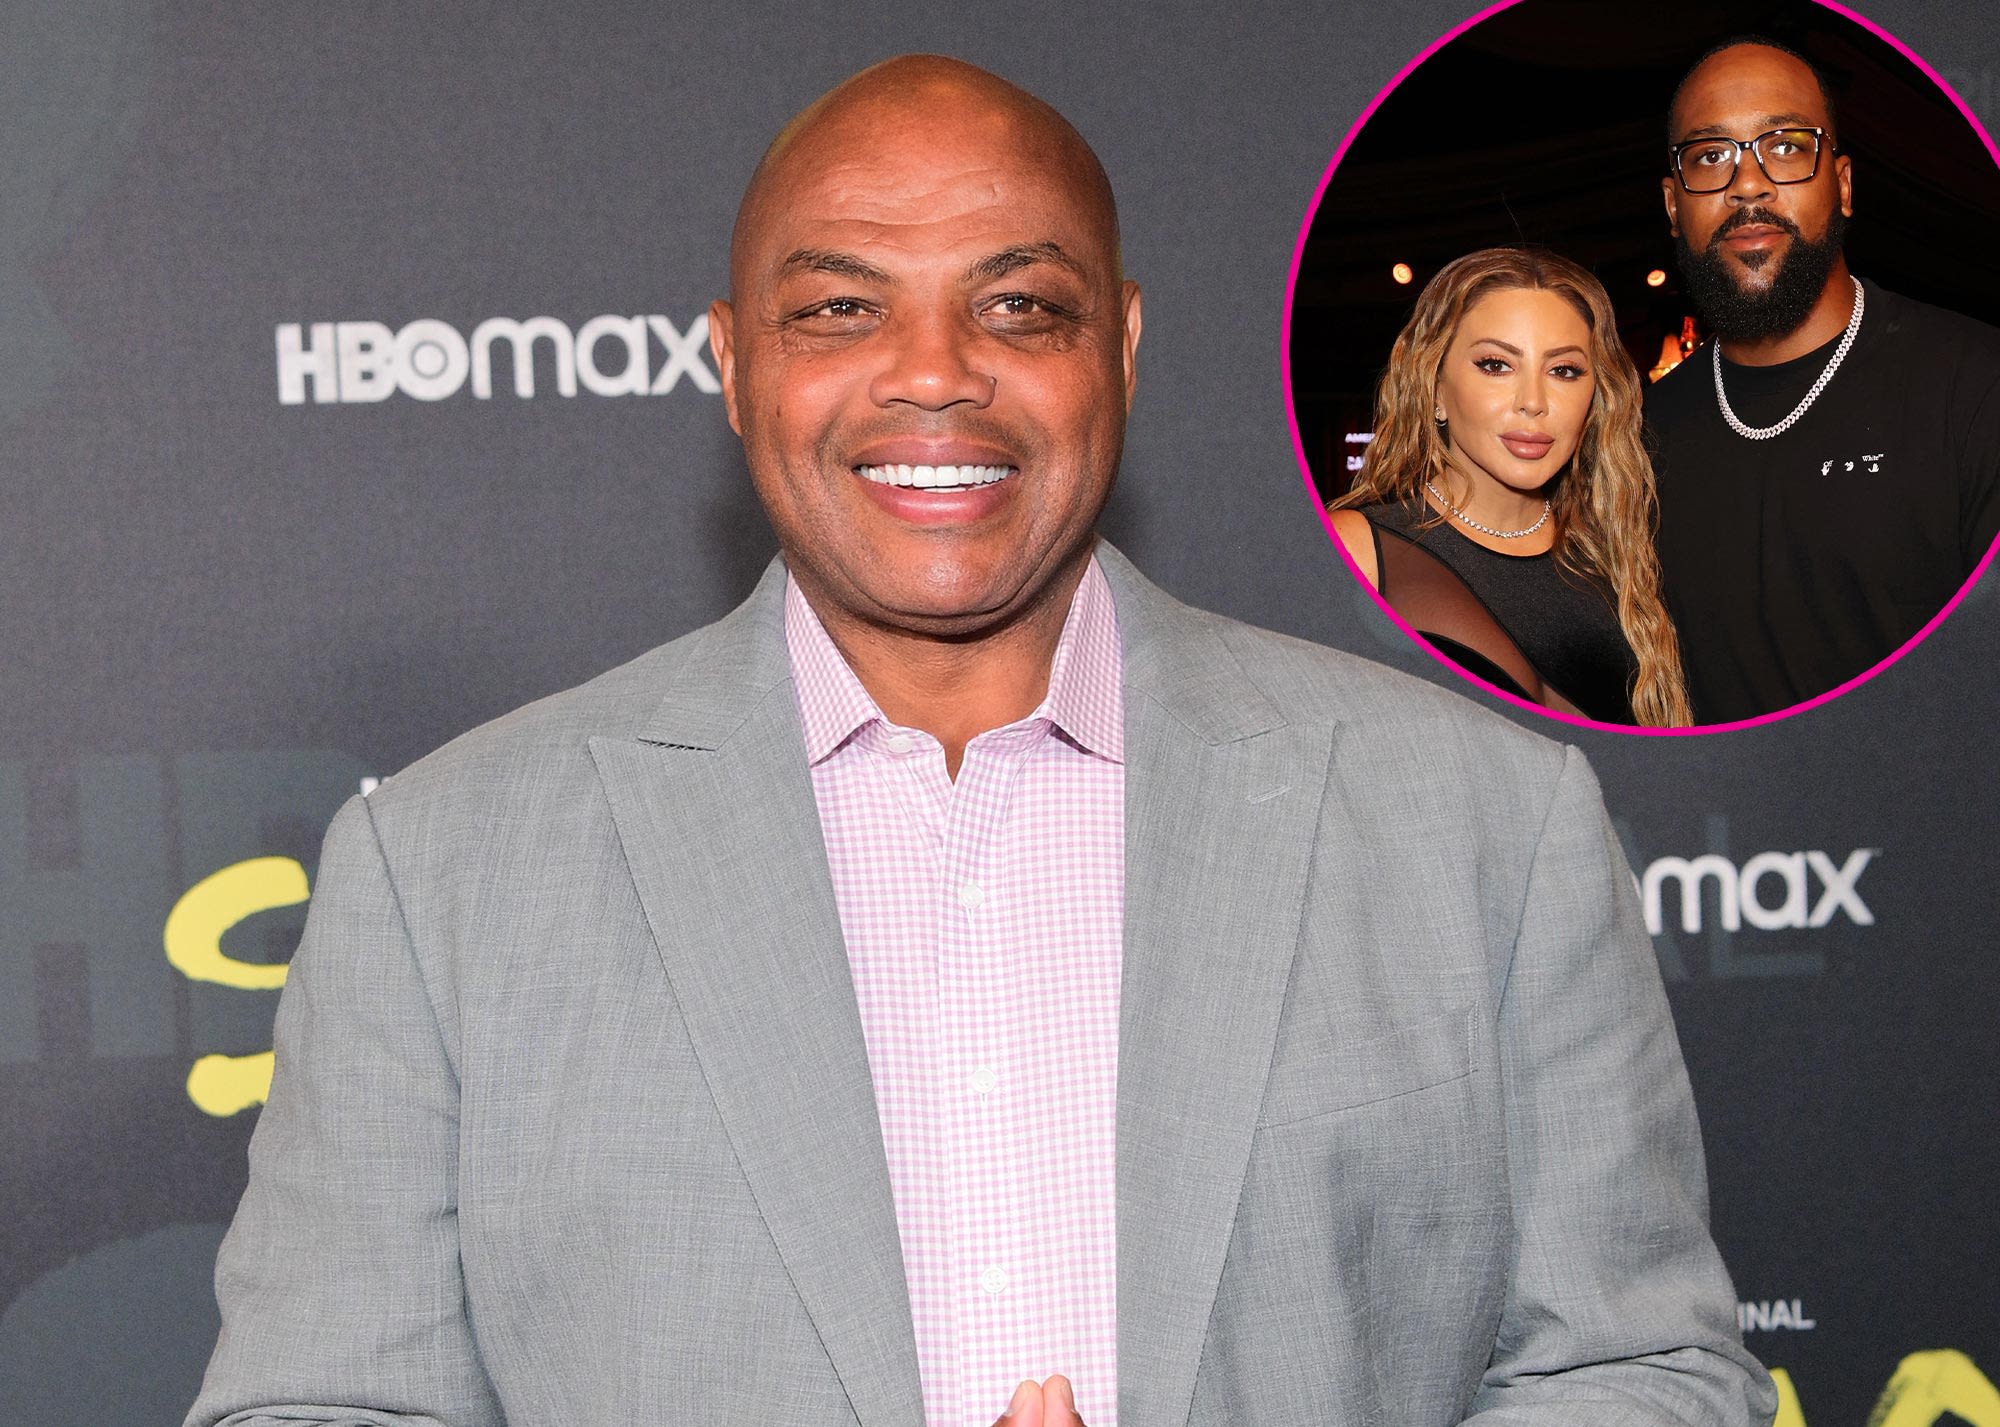 Charles Barkley Says Larsa Pippen and Marcus Jordan’s Relationship Is ‘So Messy’